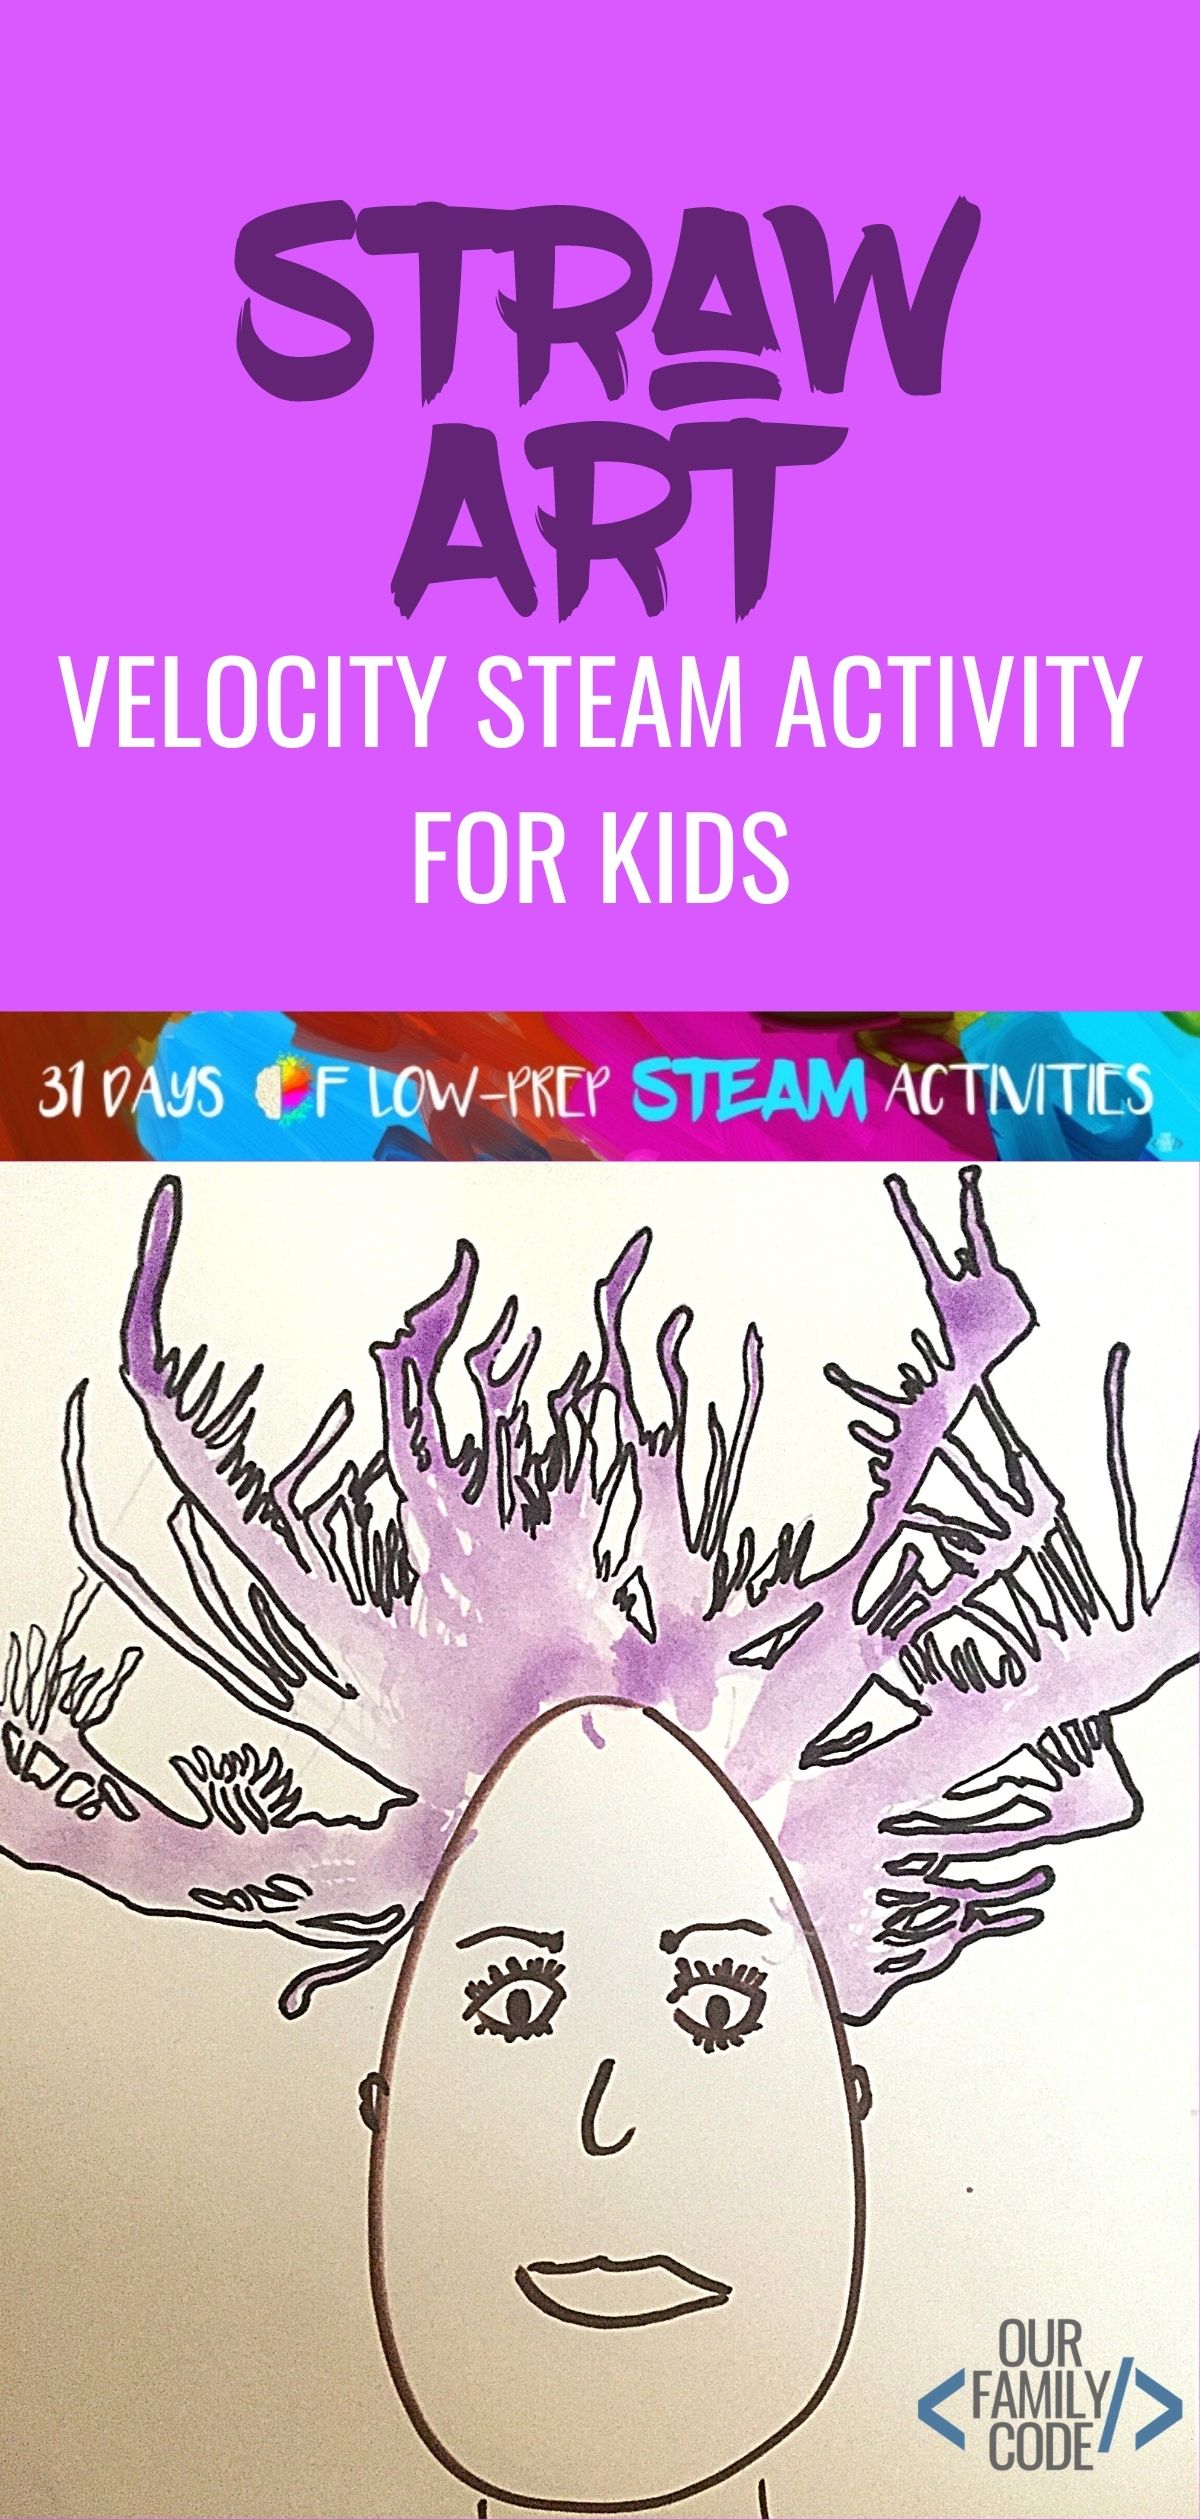 We used our knowledge of velocity to observe & compare the impact of different velocities in a visual demonstration and created velocity straw art! #artactivitiesforkids #craftsforkids #scienceactivities #teachingwind #steamactivitiesforkids #STEAM #STEM #STEAMexperiment #toddlercrafts #STEAMartproject